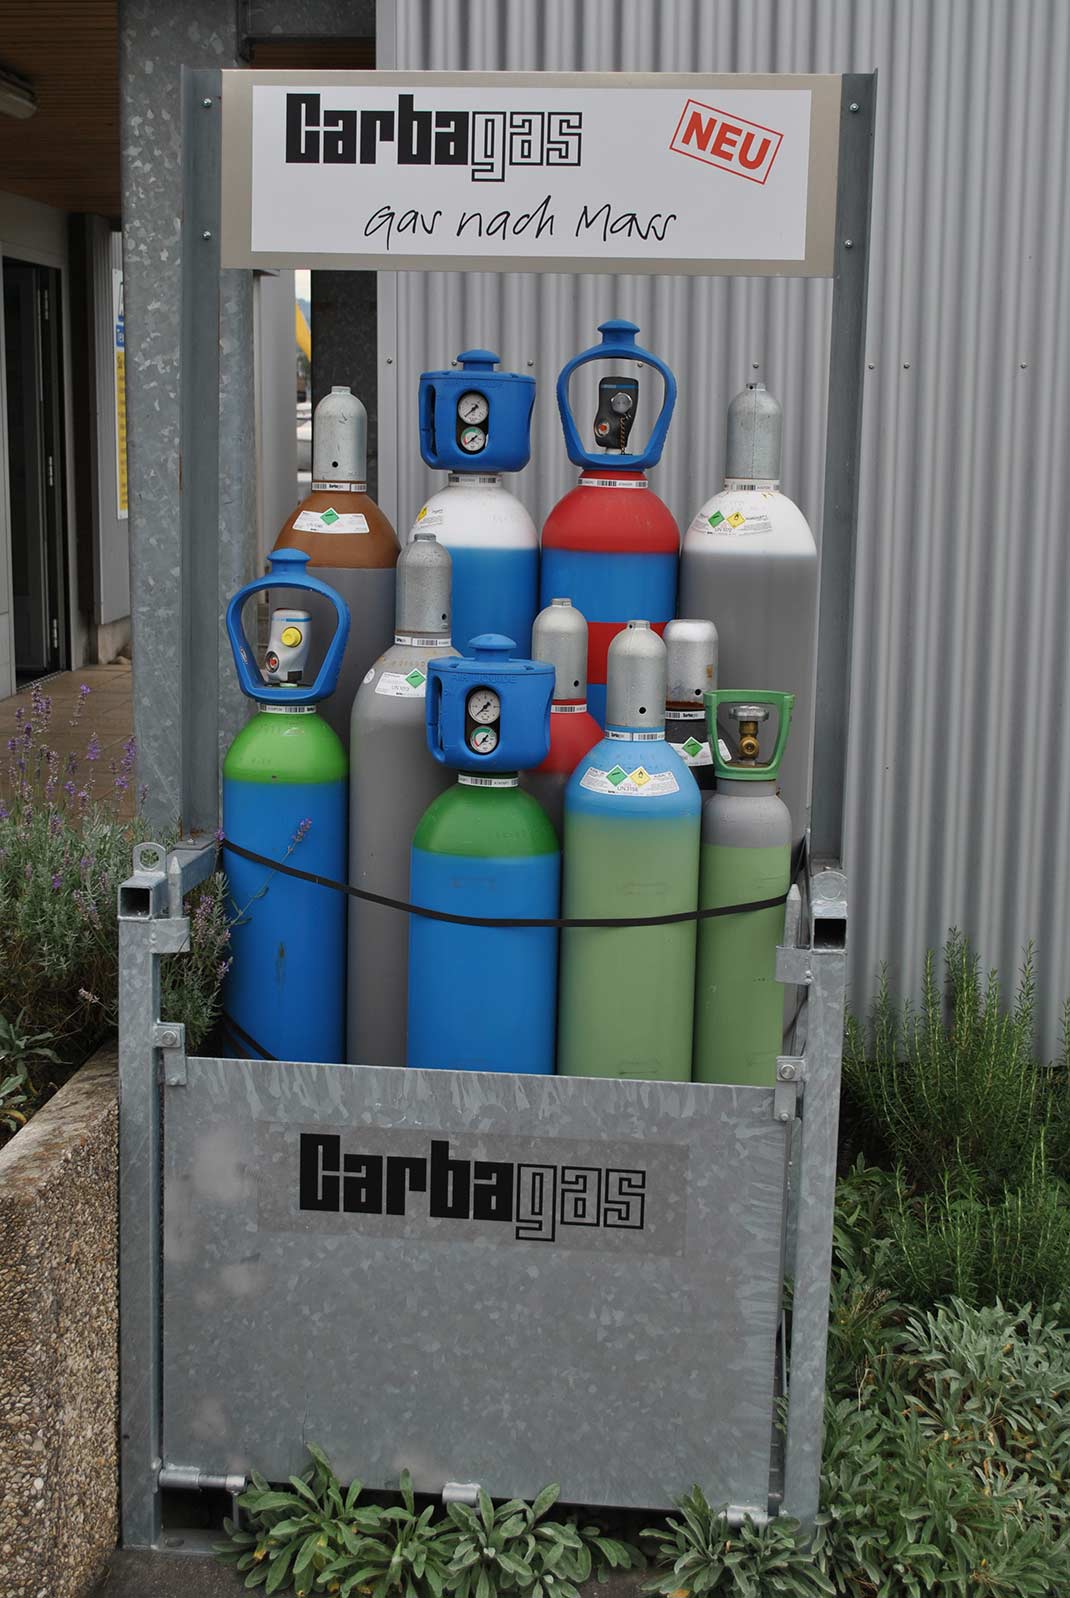 Carbagas Gaslager - Gas nach Mass